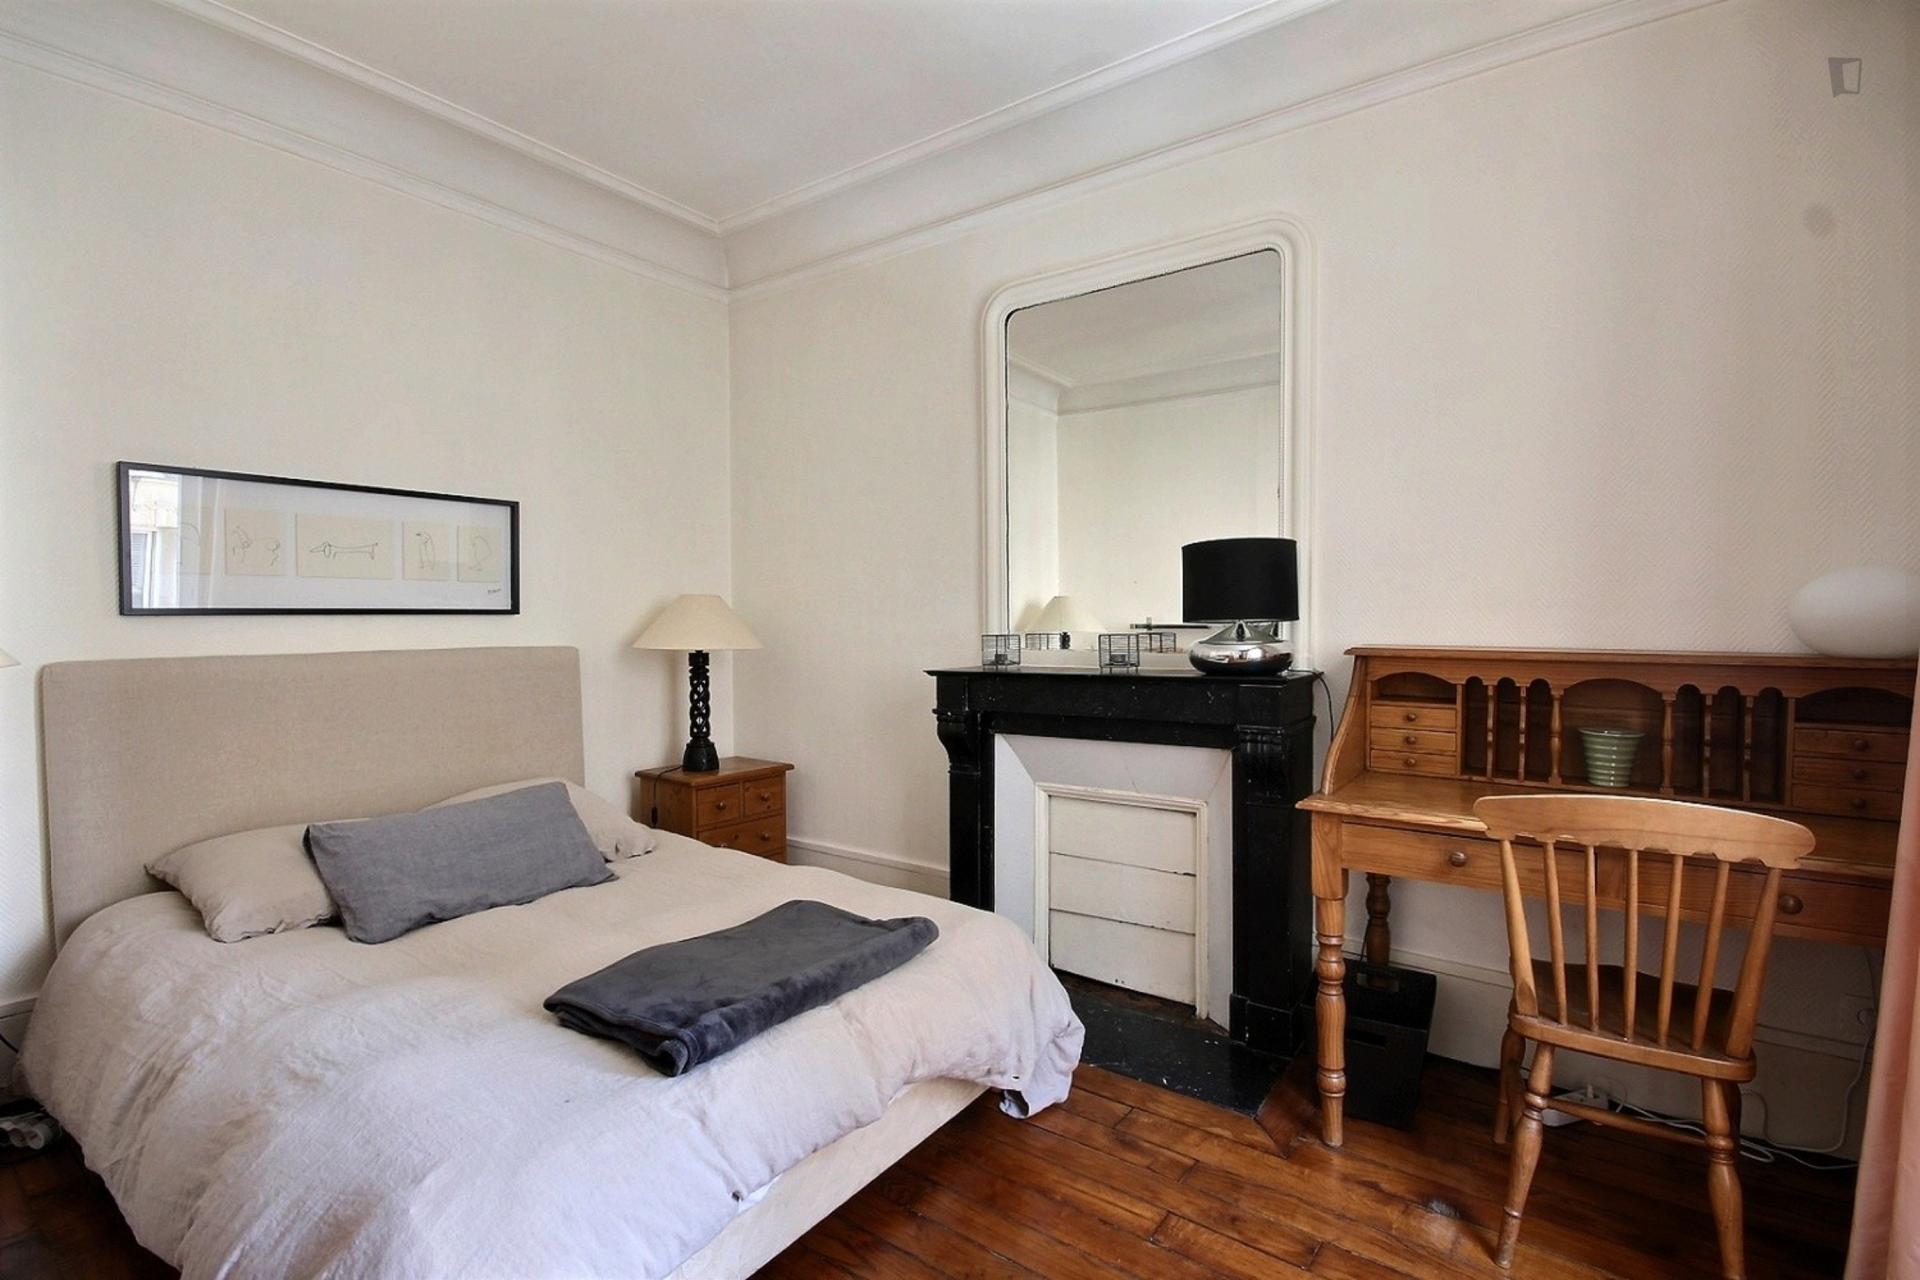 Vaugigard- Cozy Flat with View in Paris for Expat